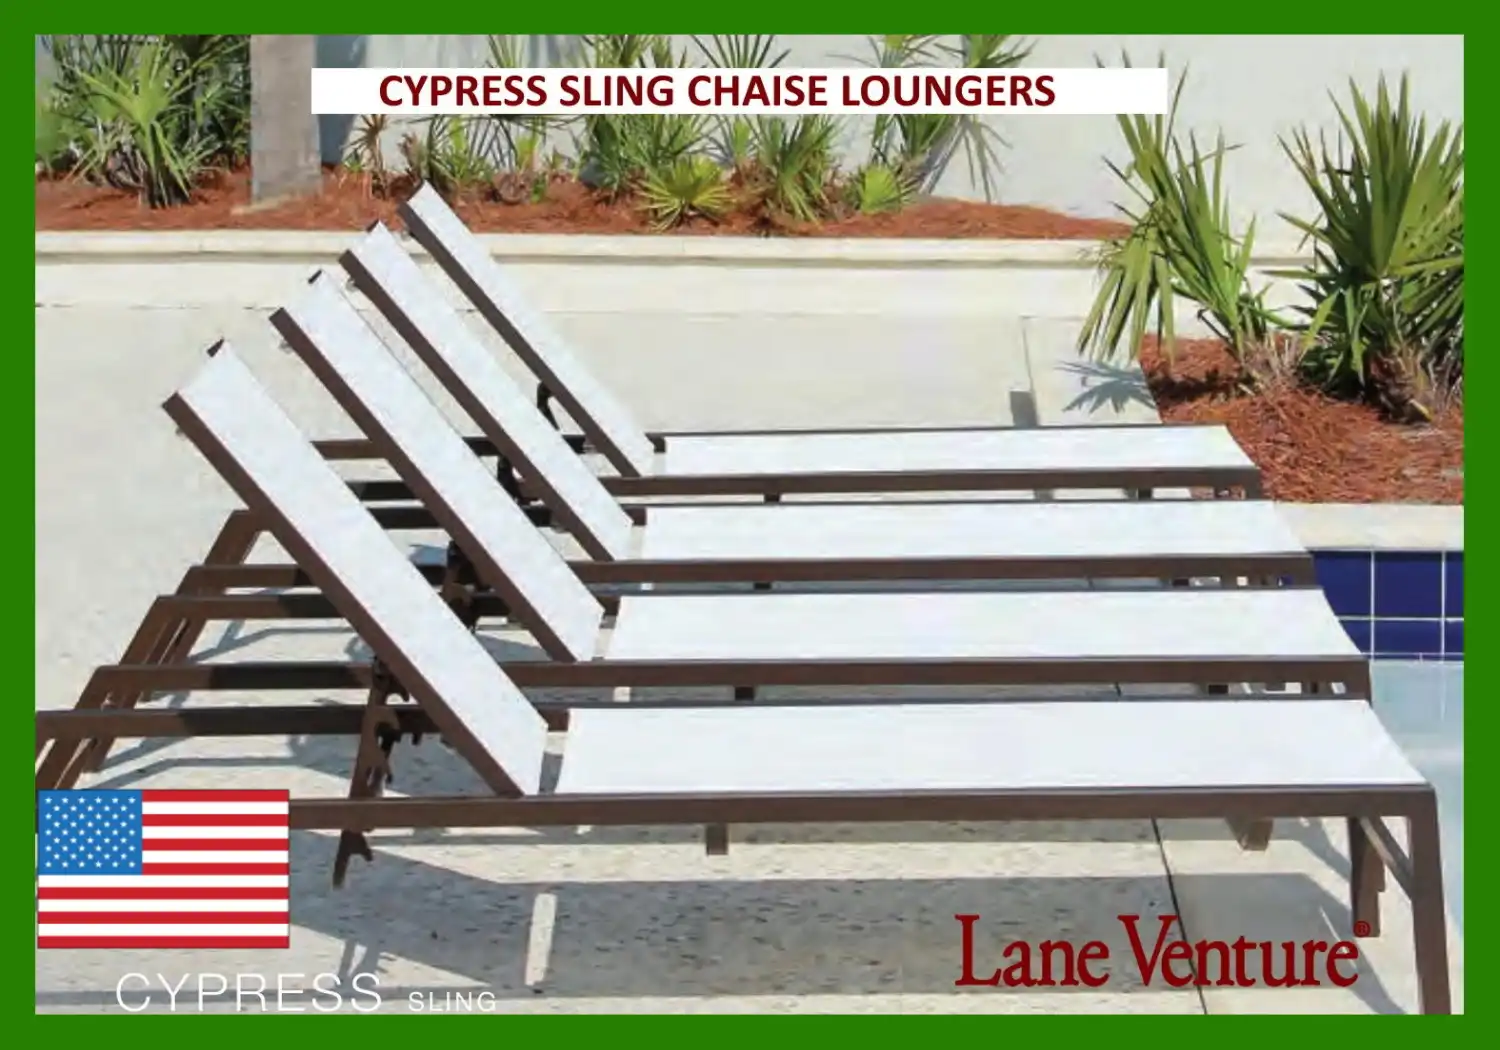 CYPRESS SLING CHAISE LOUNGERS